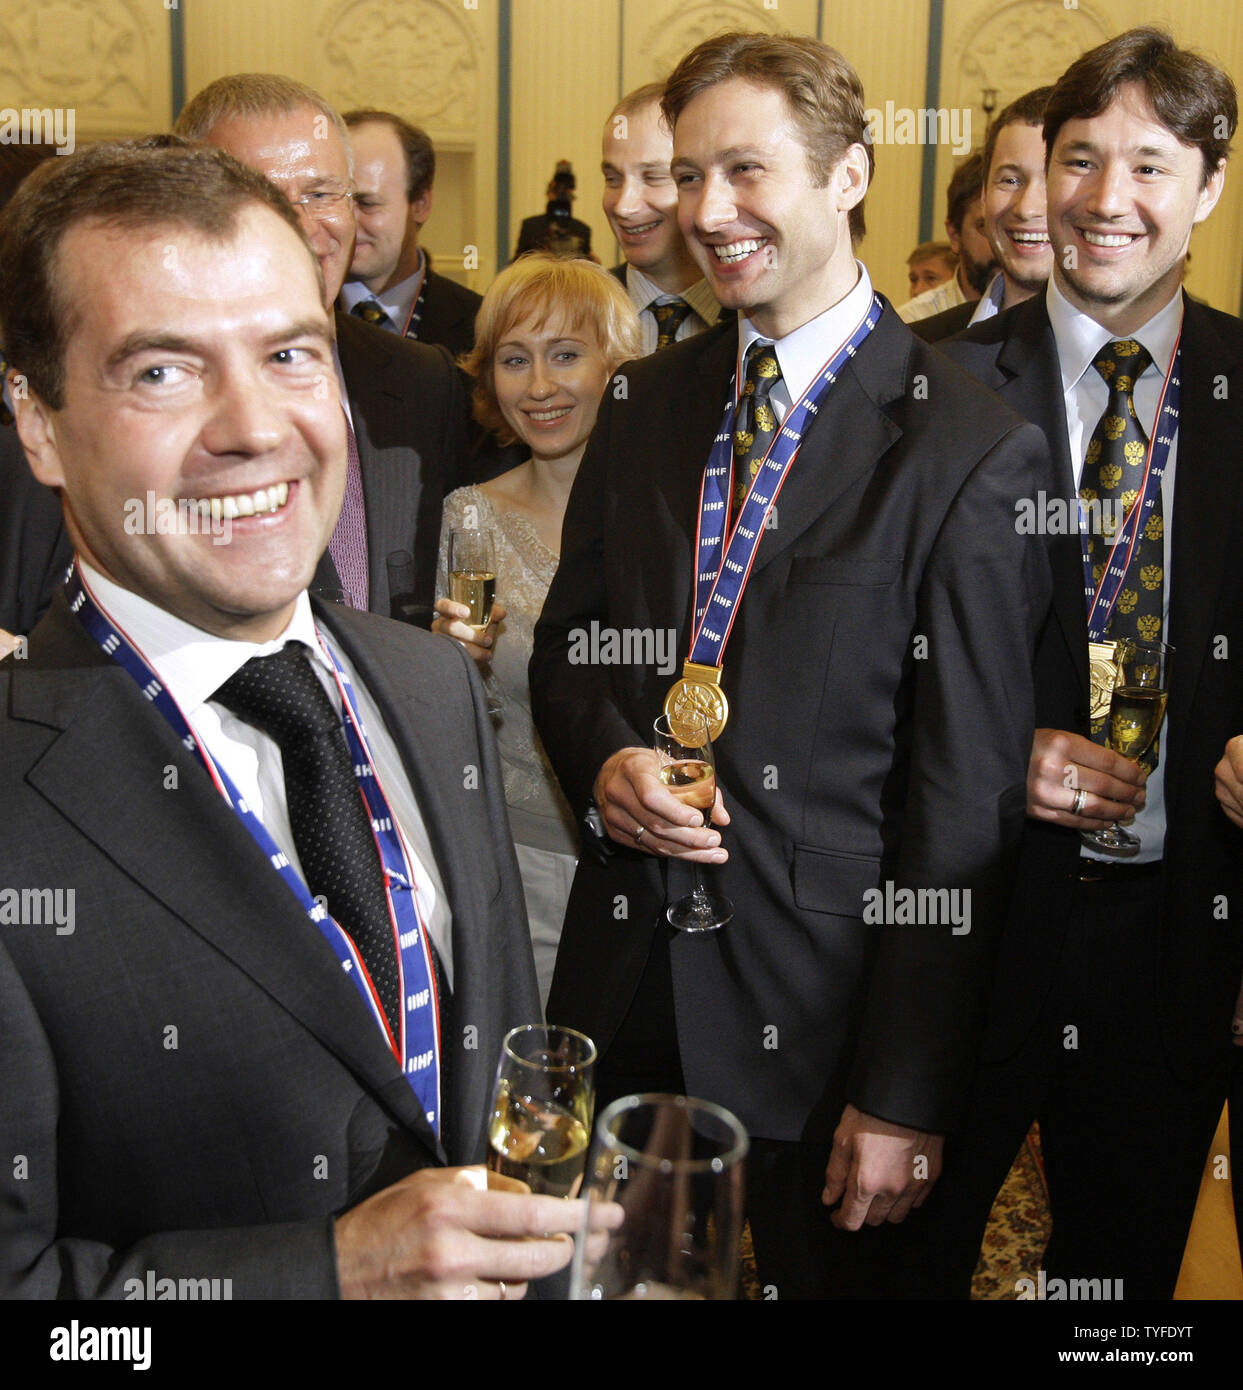 Russian President Dmitry Medvedev (L) with player Iliya Kovalchuk (R) and captain Alexei Morozov (C) toast during a celebration in the Kremlin in Moscow on May 12, 2009. In the final match on Sunday Russia beat Canada 2-1 and won the gold-medal of the ice hockey world championships. (UPI Photo/Anatoli Zhdanov) Stock Photo